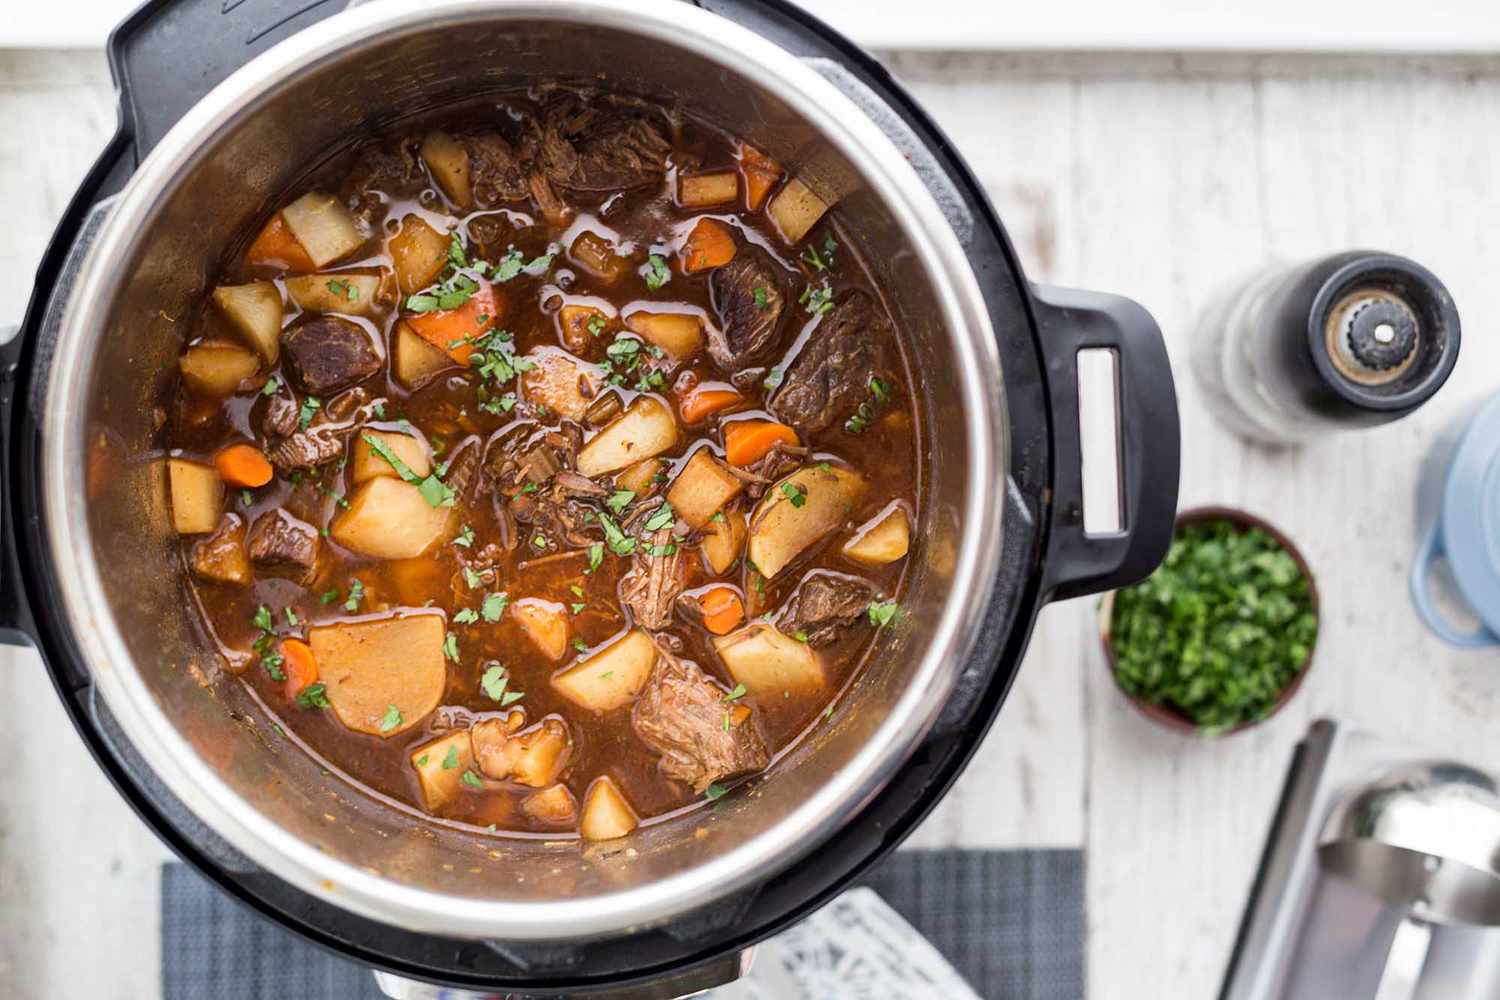 How Long Do You Cook Beef Stew In An Electric Pressure Cooker?